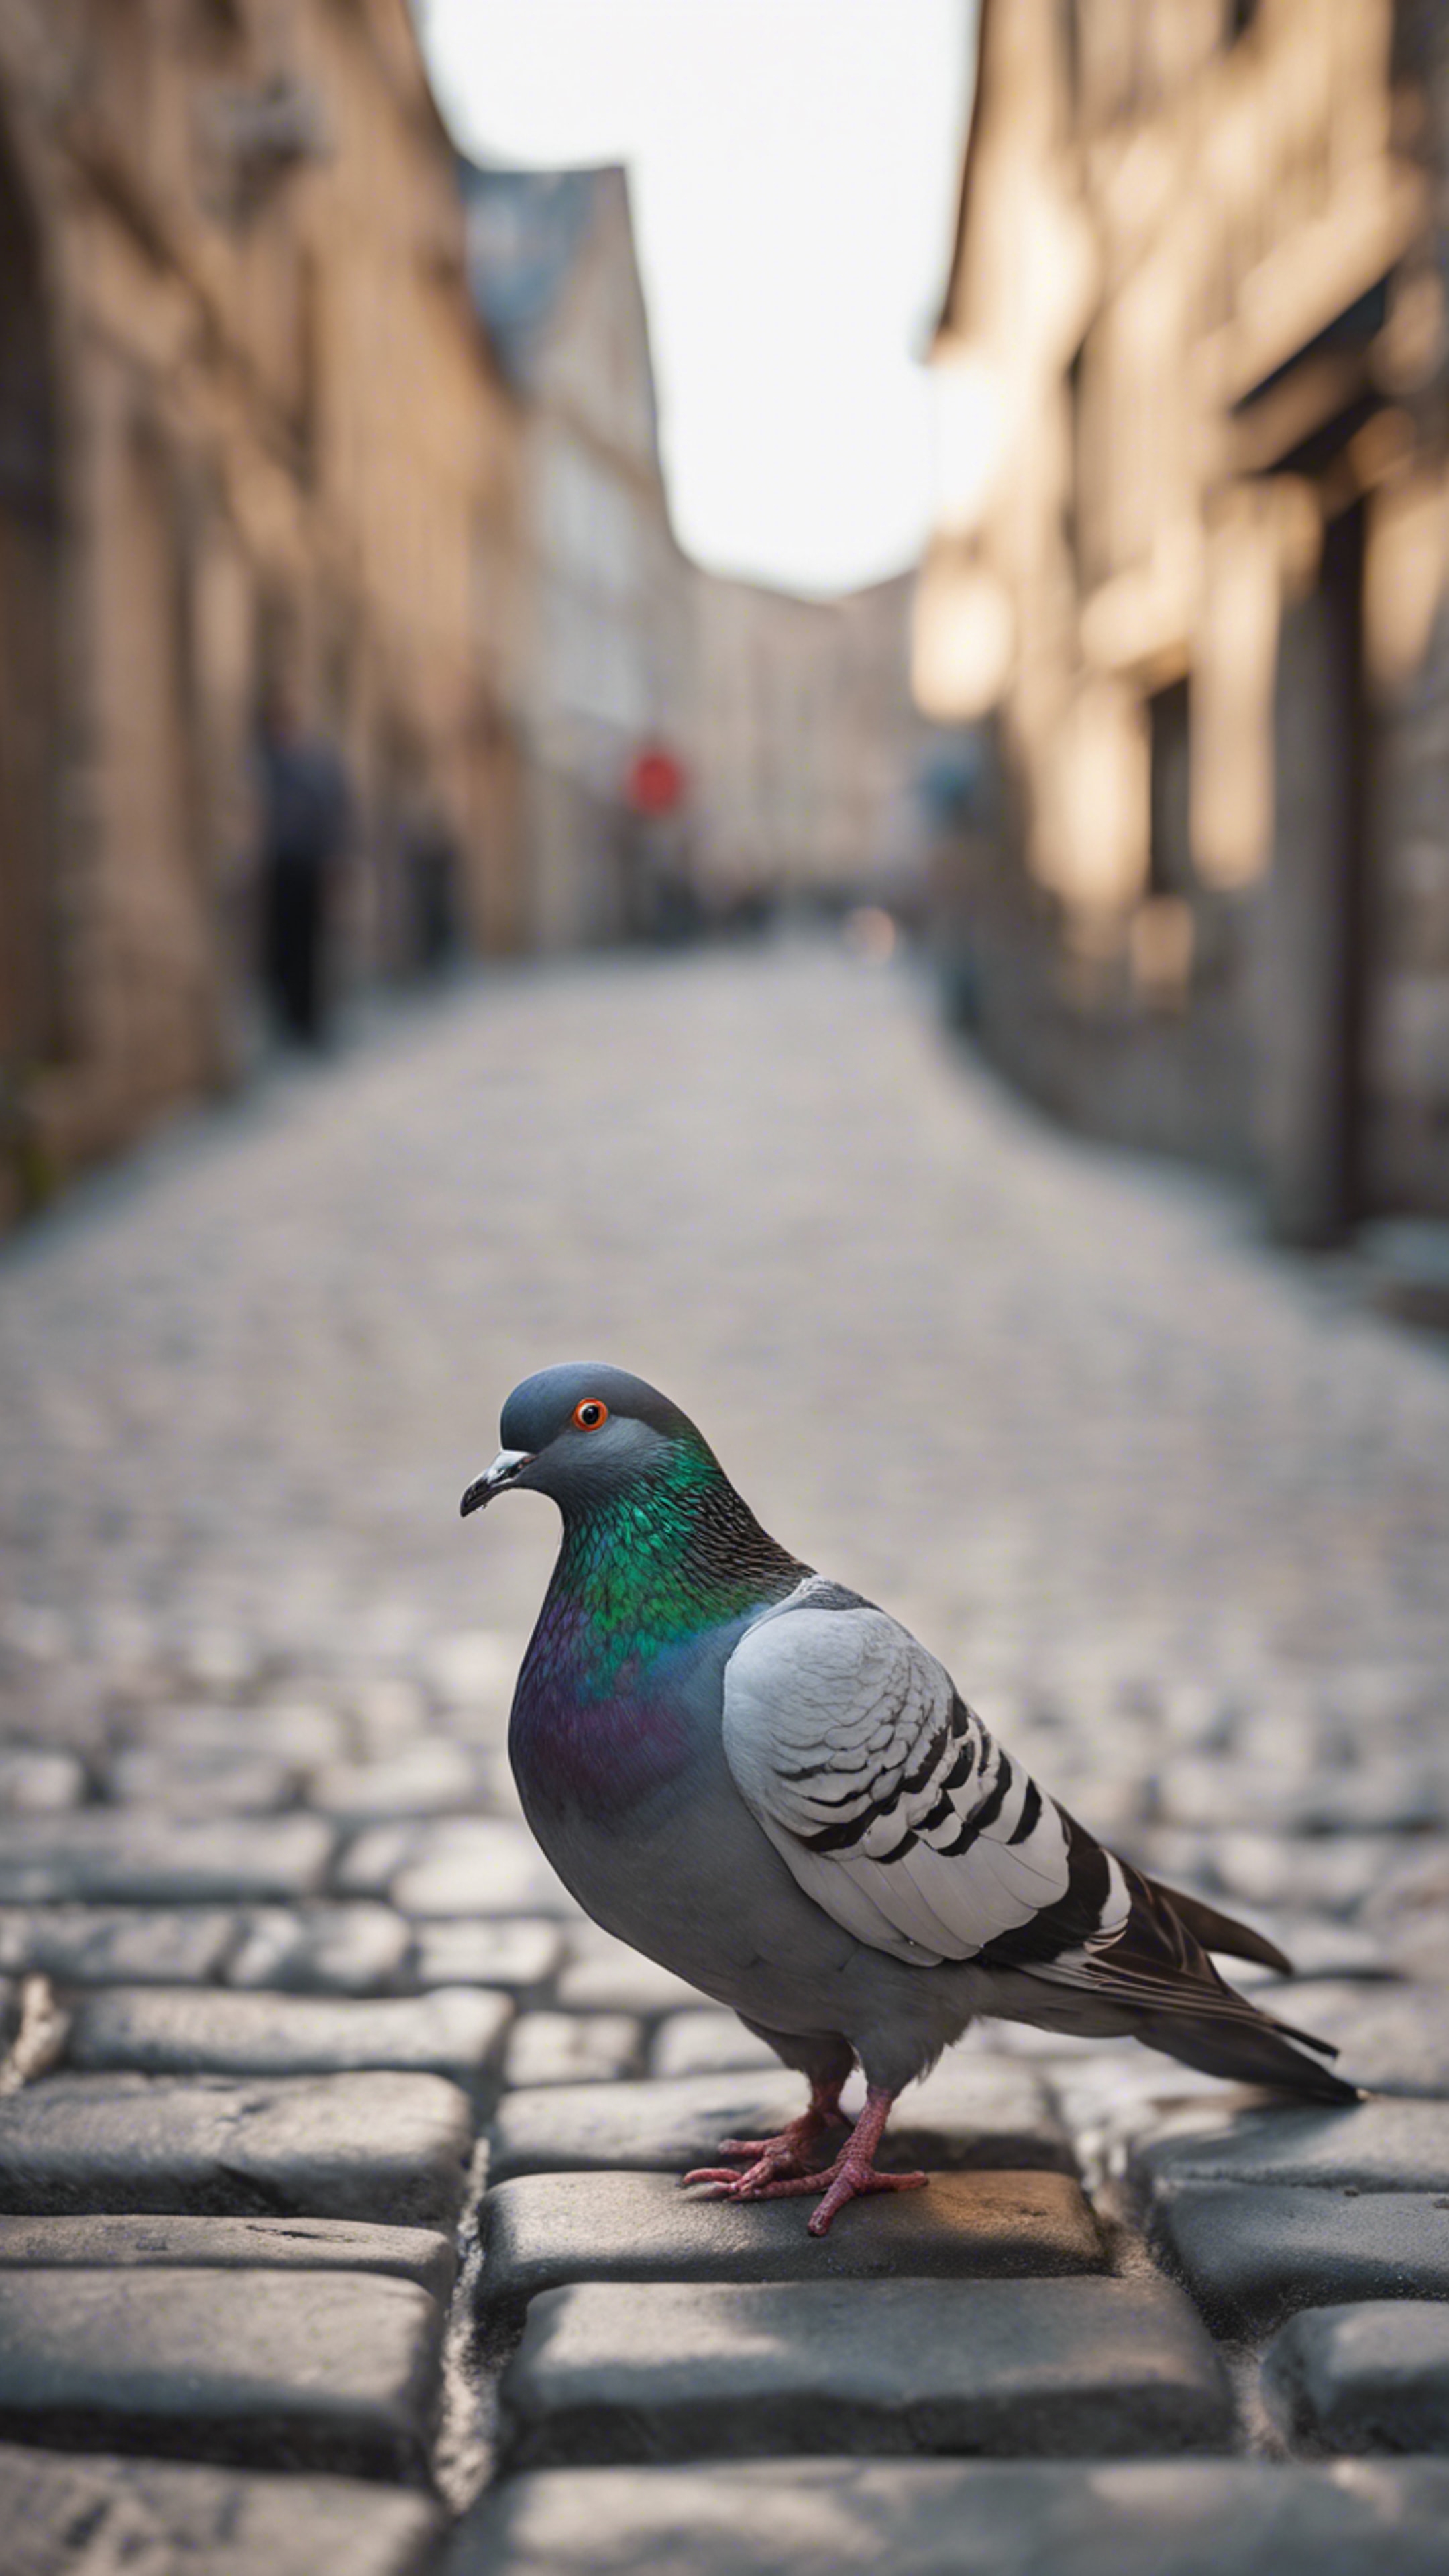 A pigeon standing on cobblestone street in the middle of an old city, its beautiful light gray plumage glistening. duvar kağıdı[03a93bb4226c4140ad33]